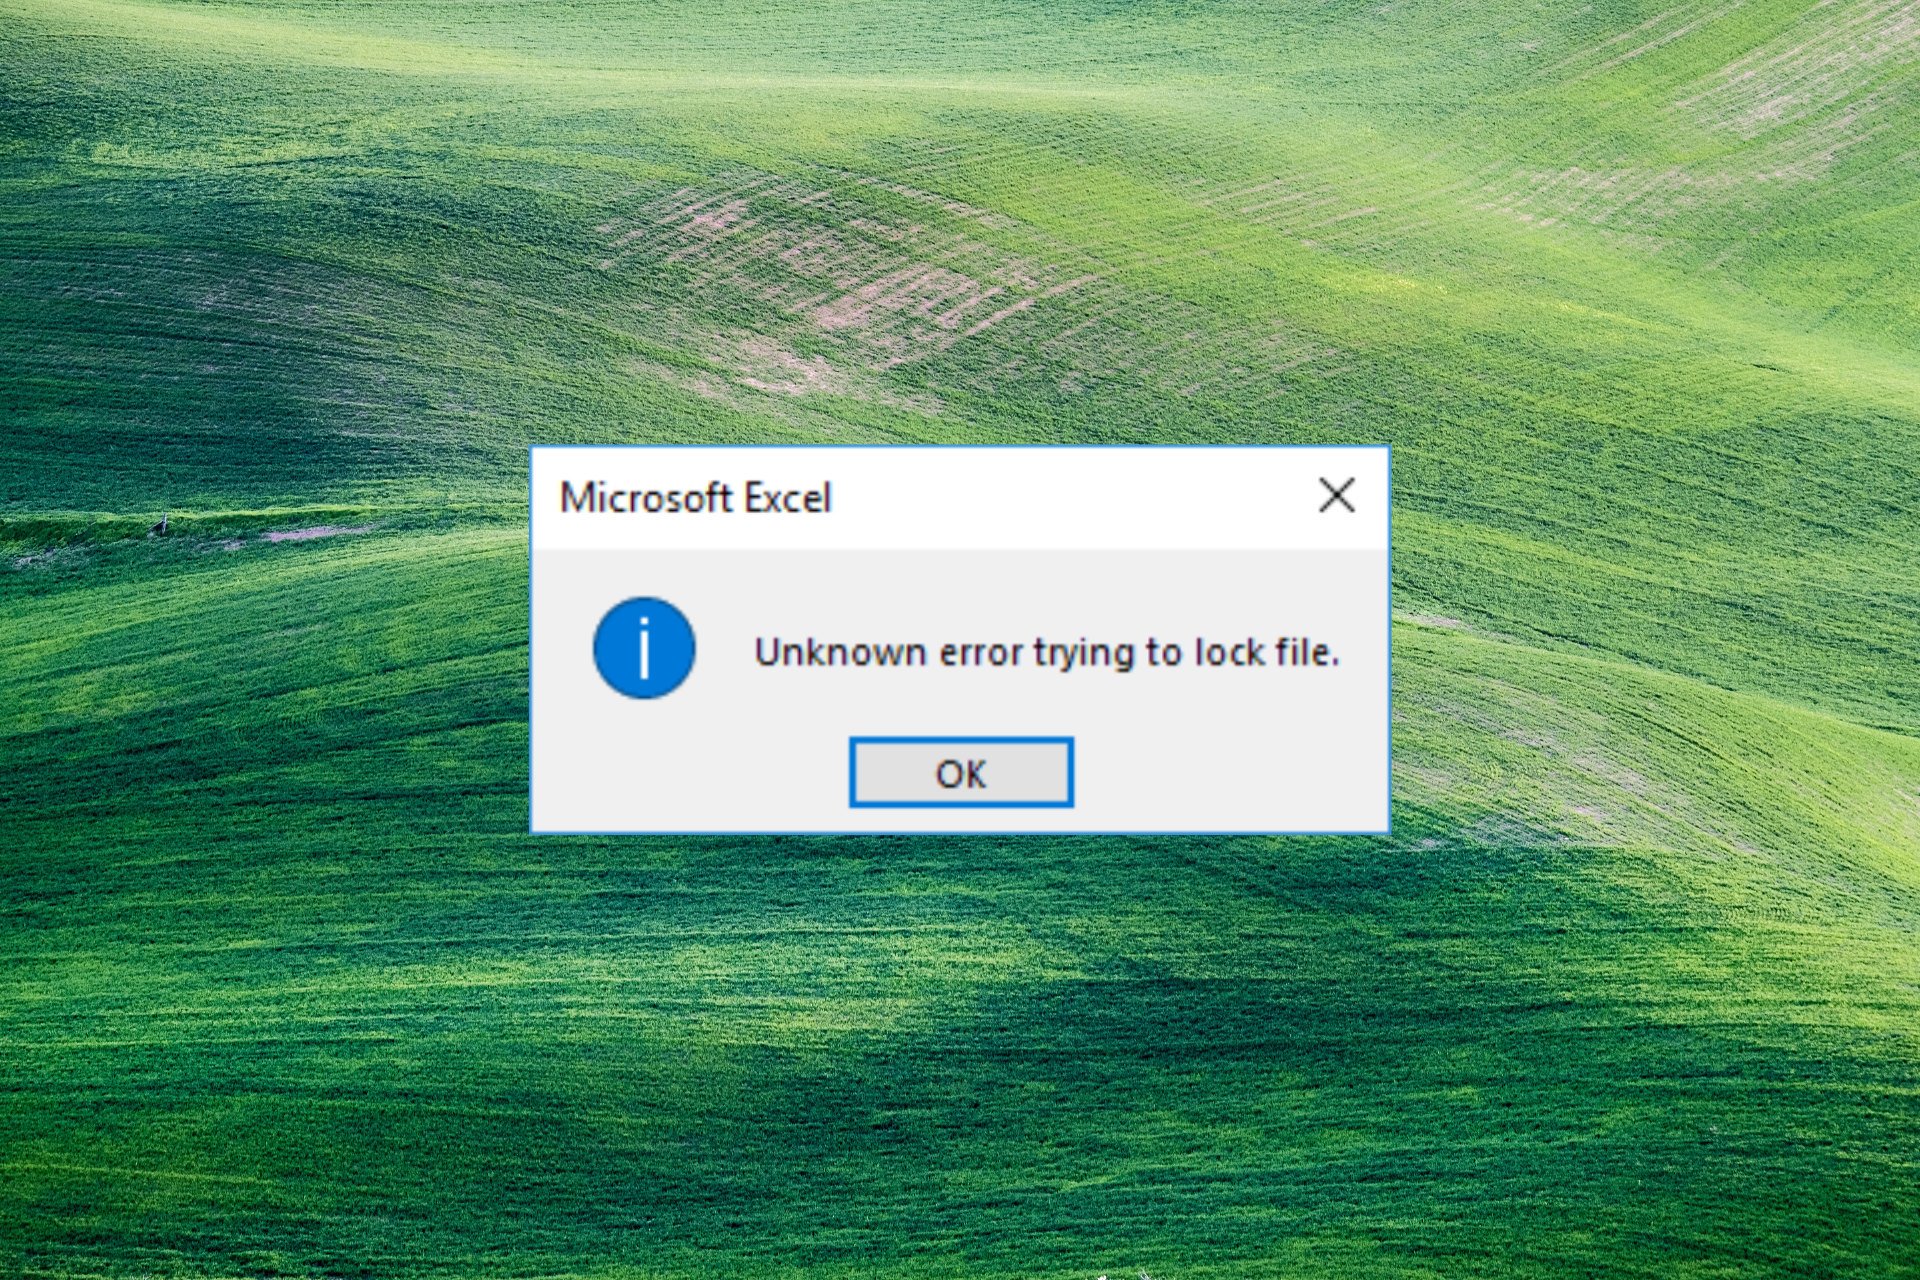 How to fix Unknown Error Trying to Lock File